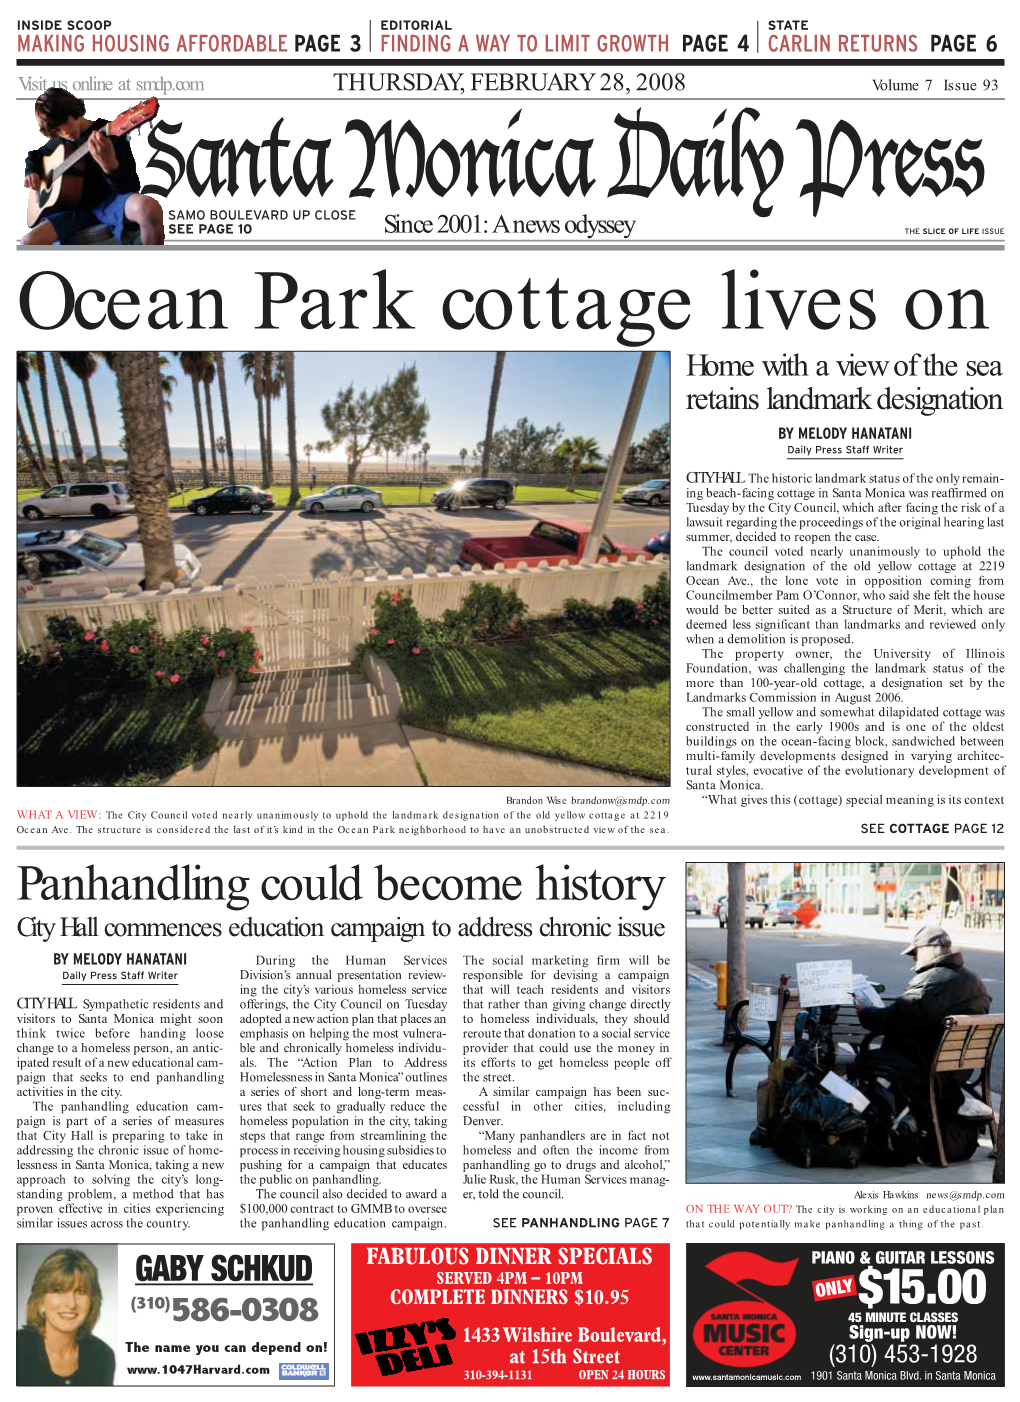 Ocean Park Cottage Lives on Home with a View of the Sea Retains Landmark Designation by MELODY HANATANI Daily Press Staff Writer